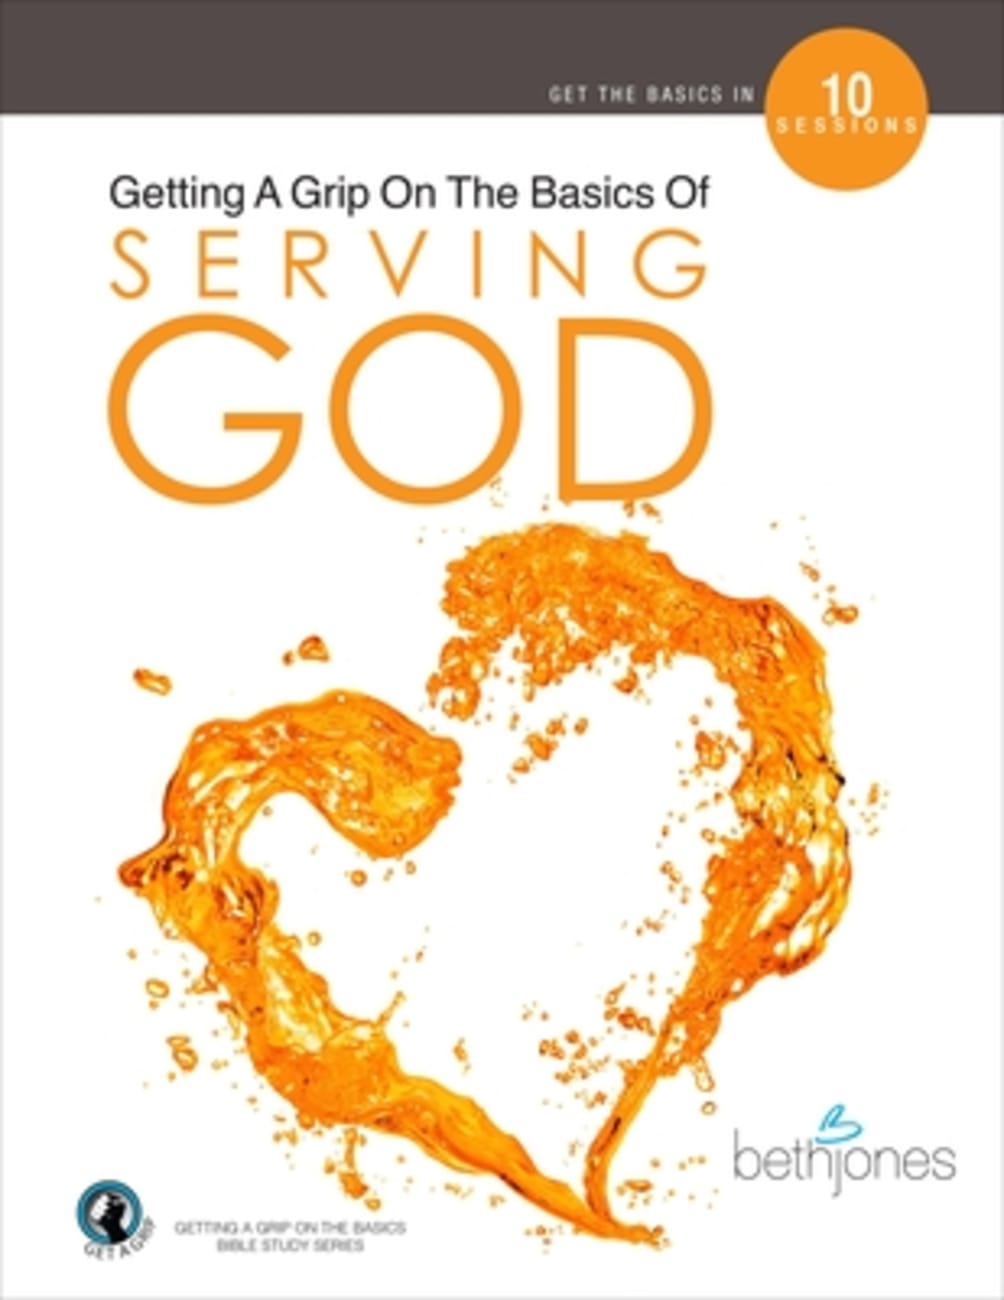 Serving God (10 Sessions) (Getting A Grip On The Bsaics Series) Paperback